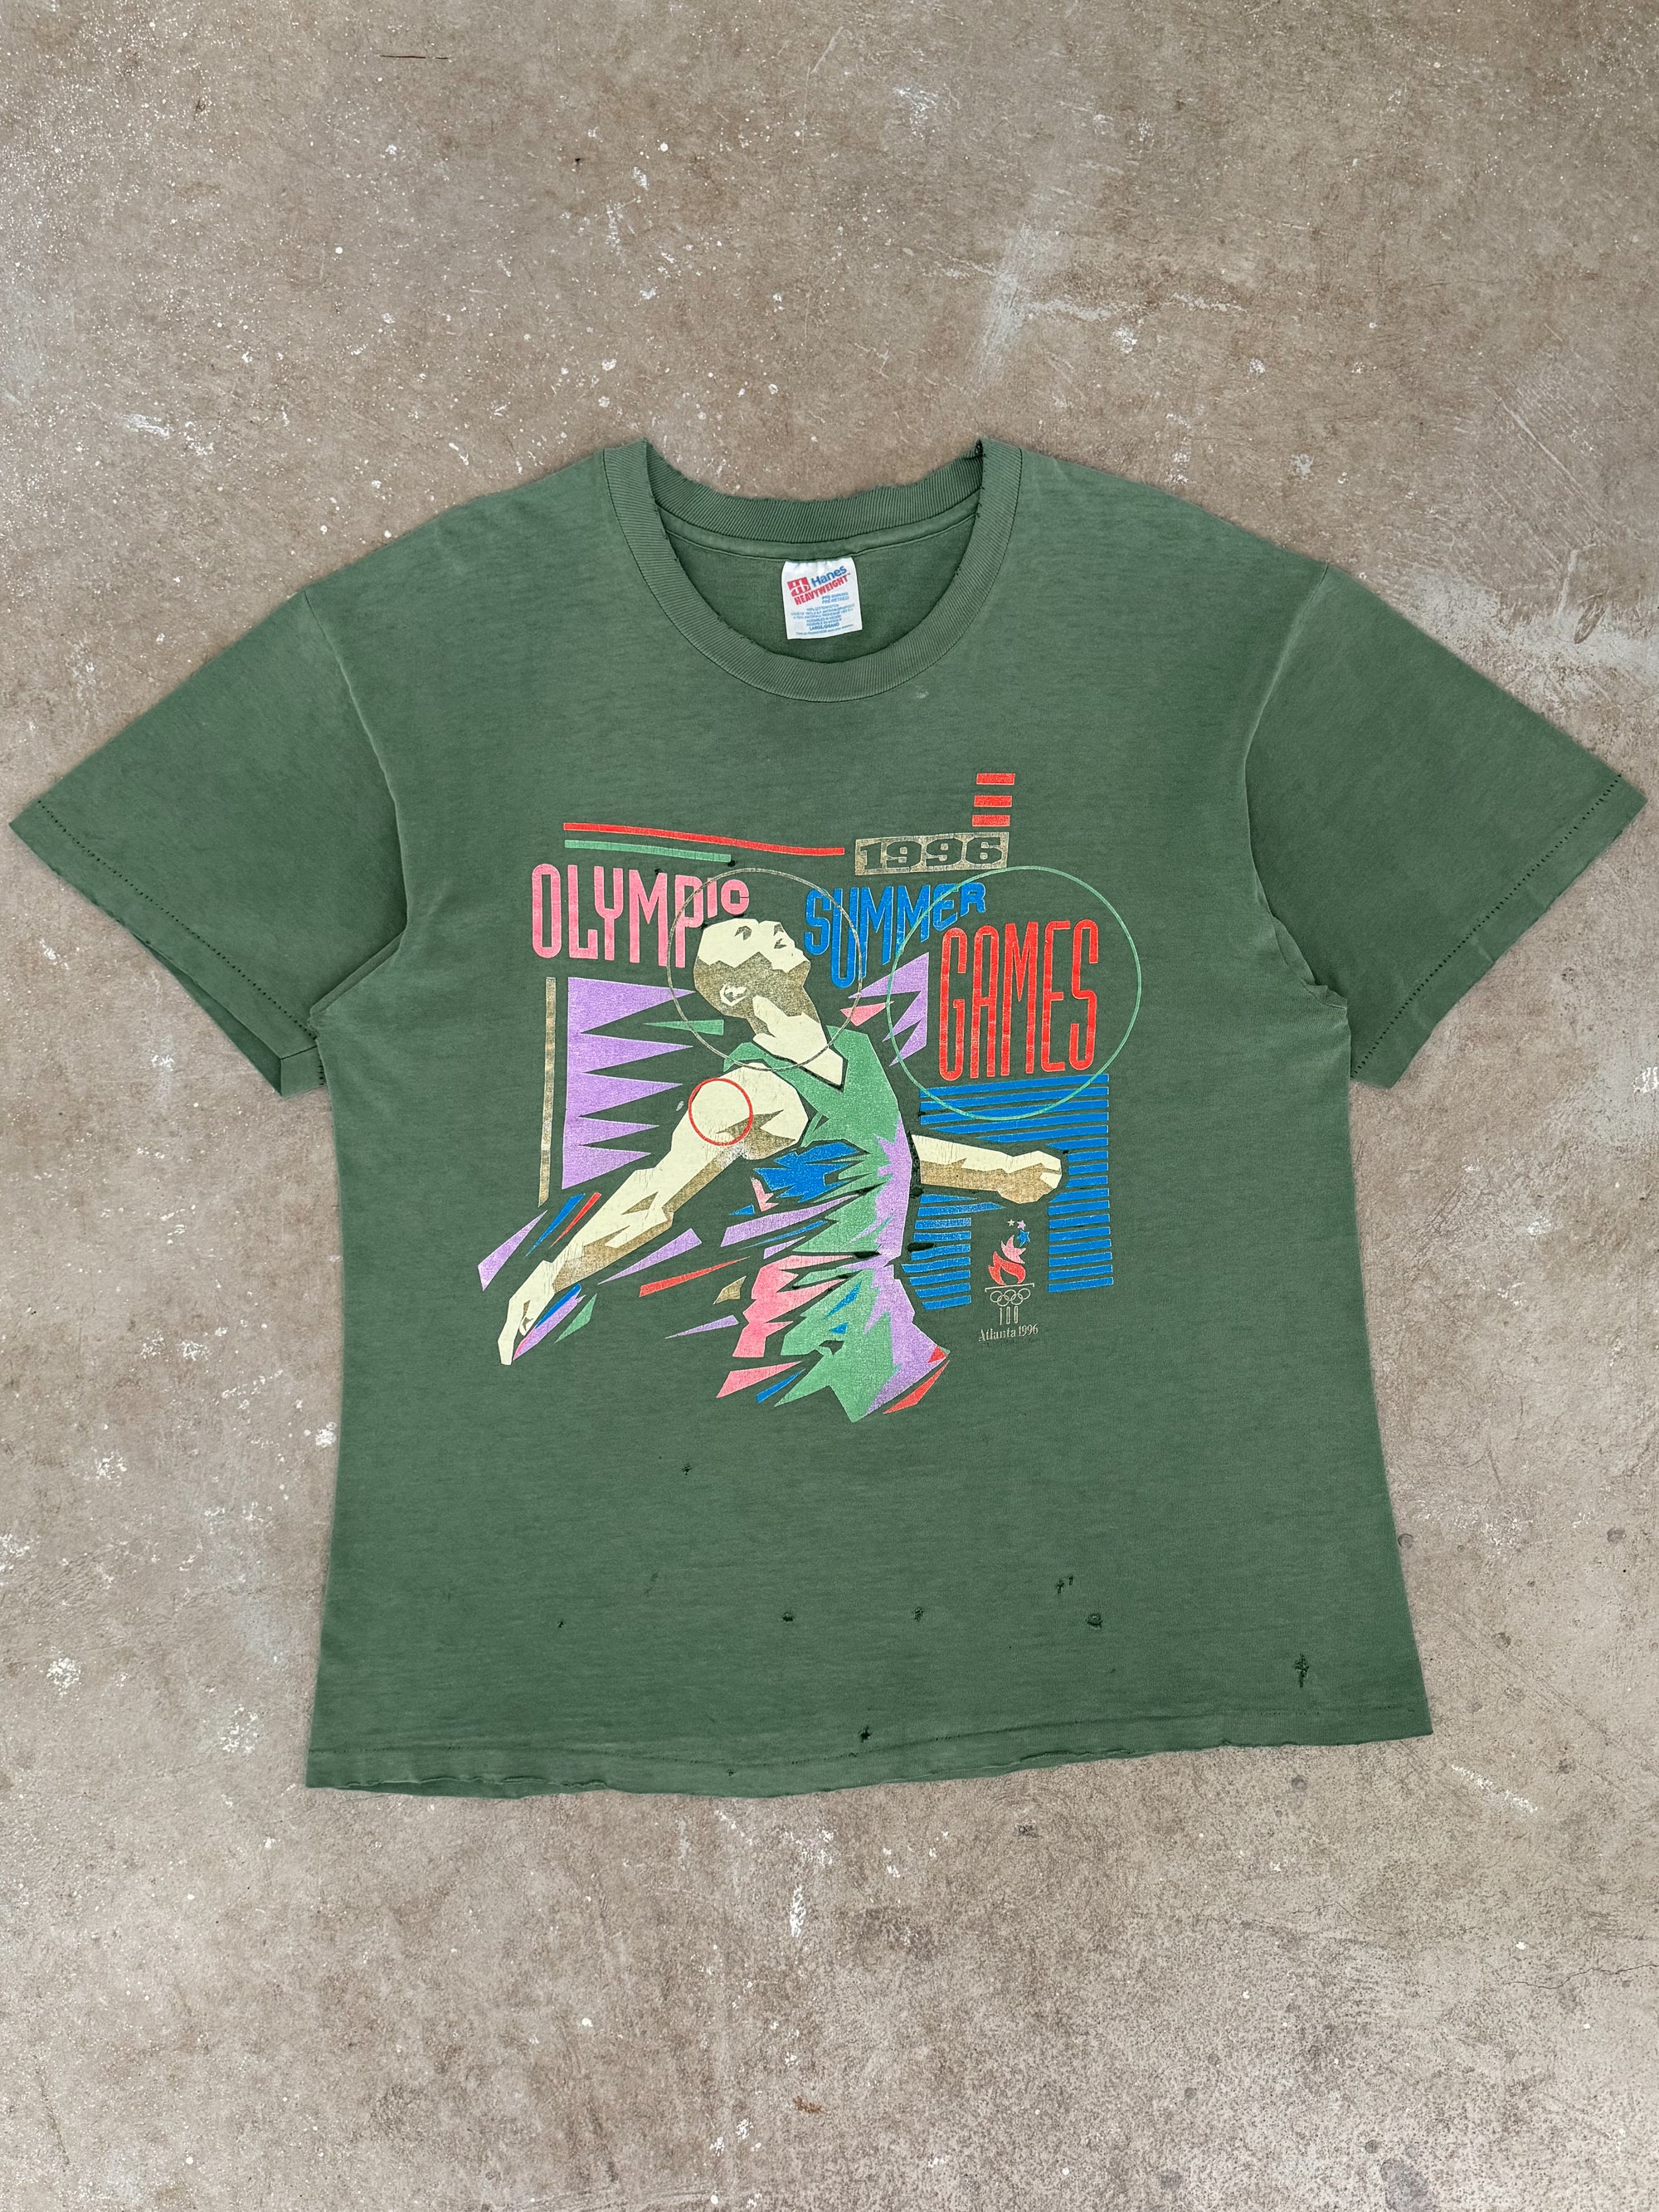 1990s "Olympic Summer Games" Distressed Tee (L)